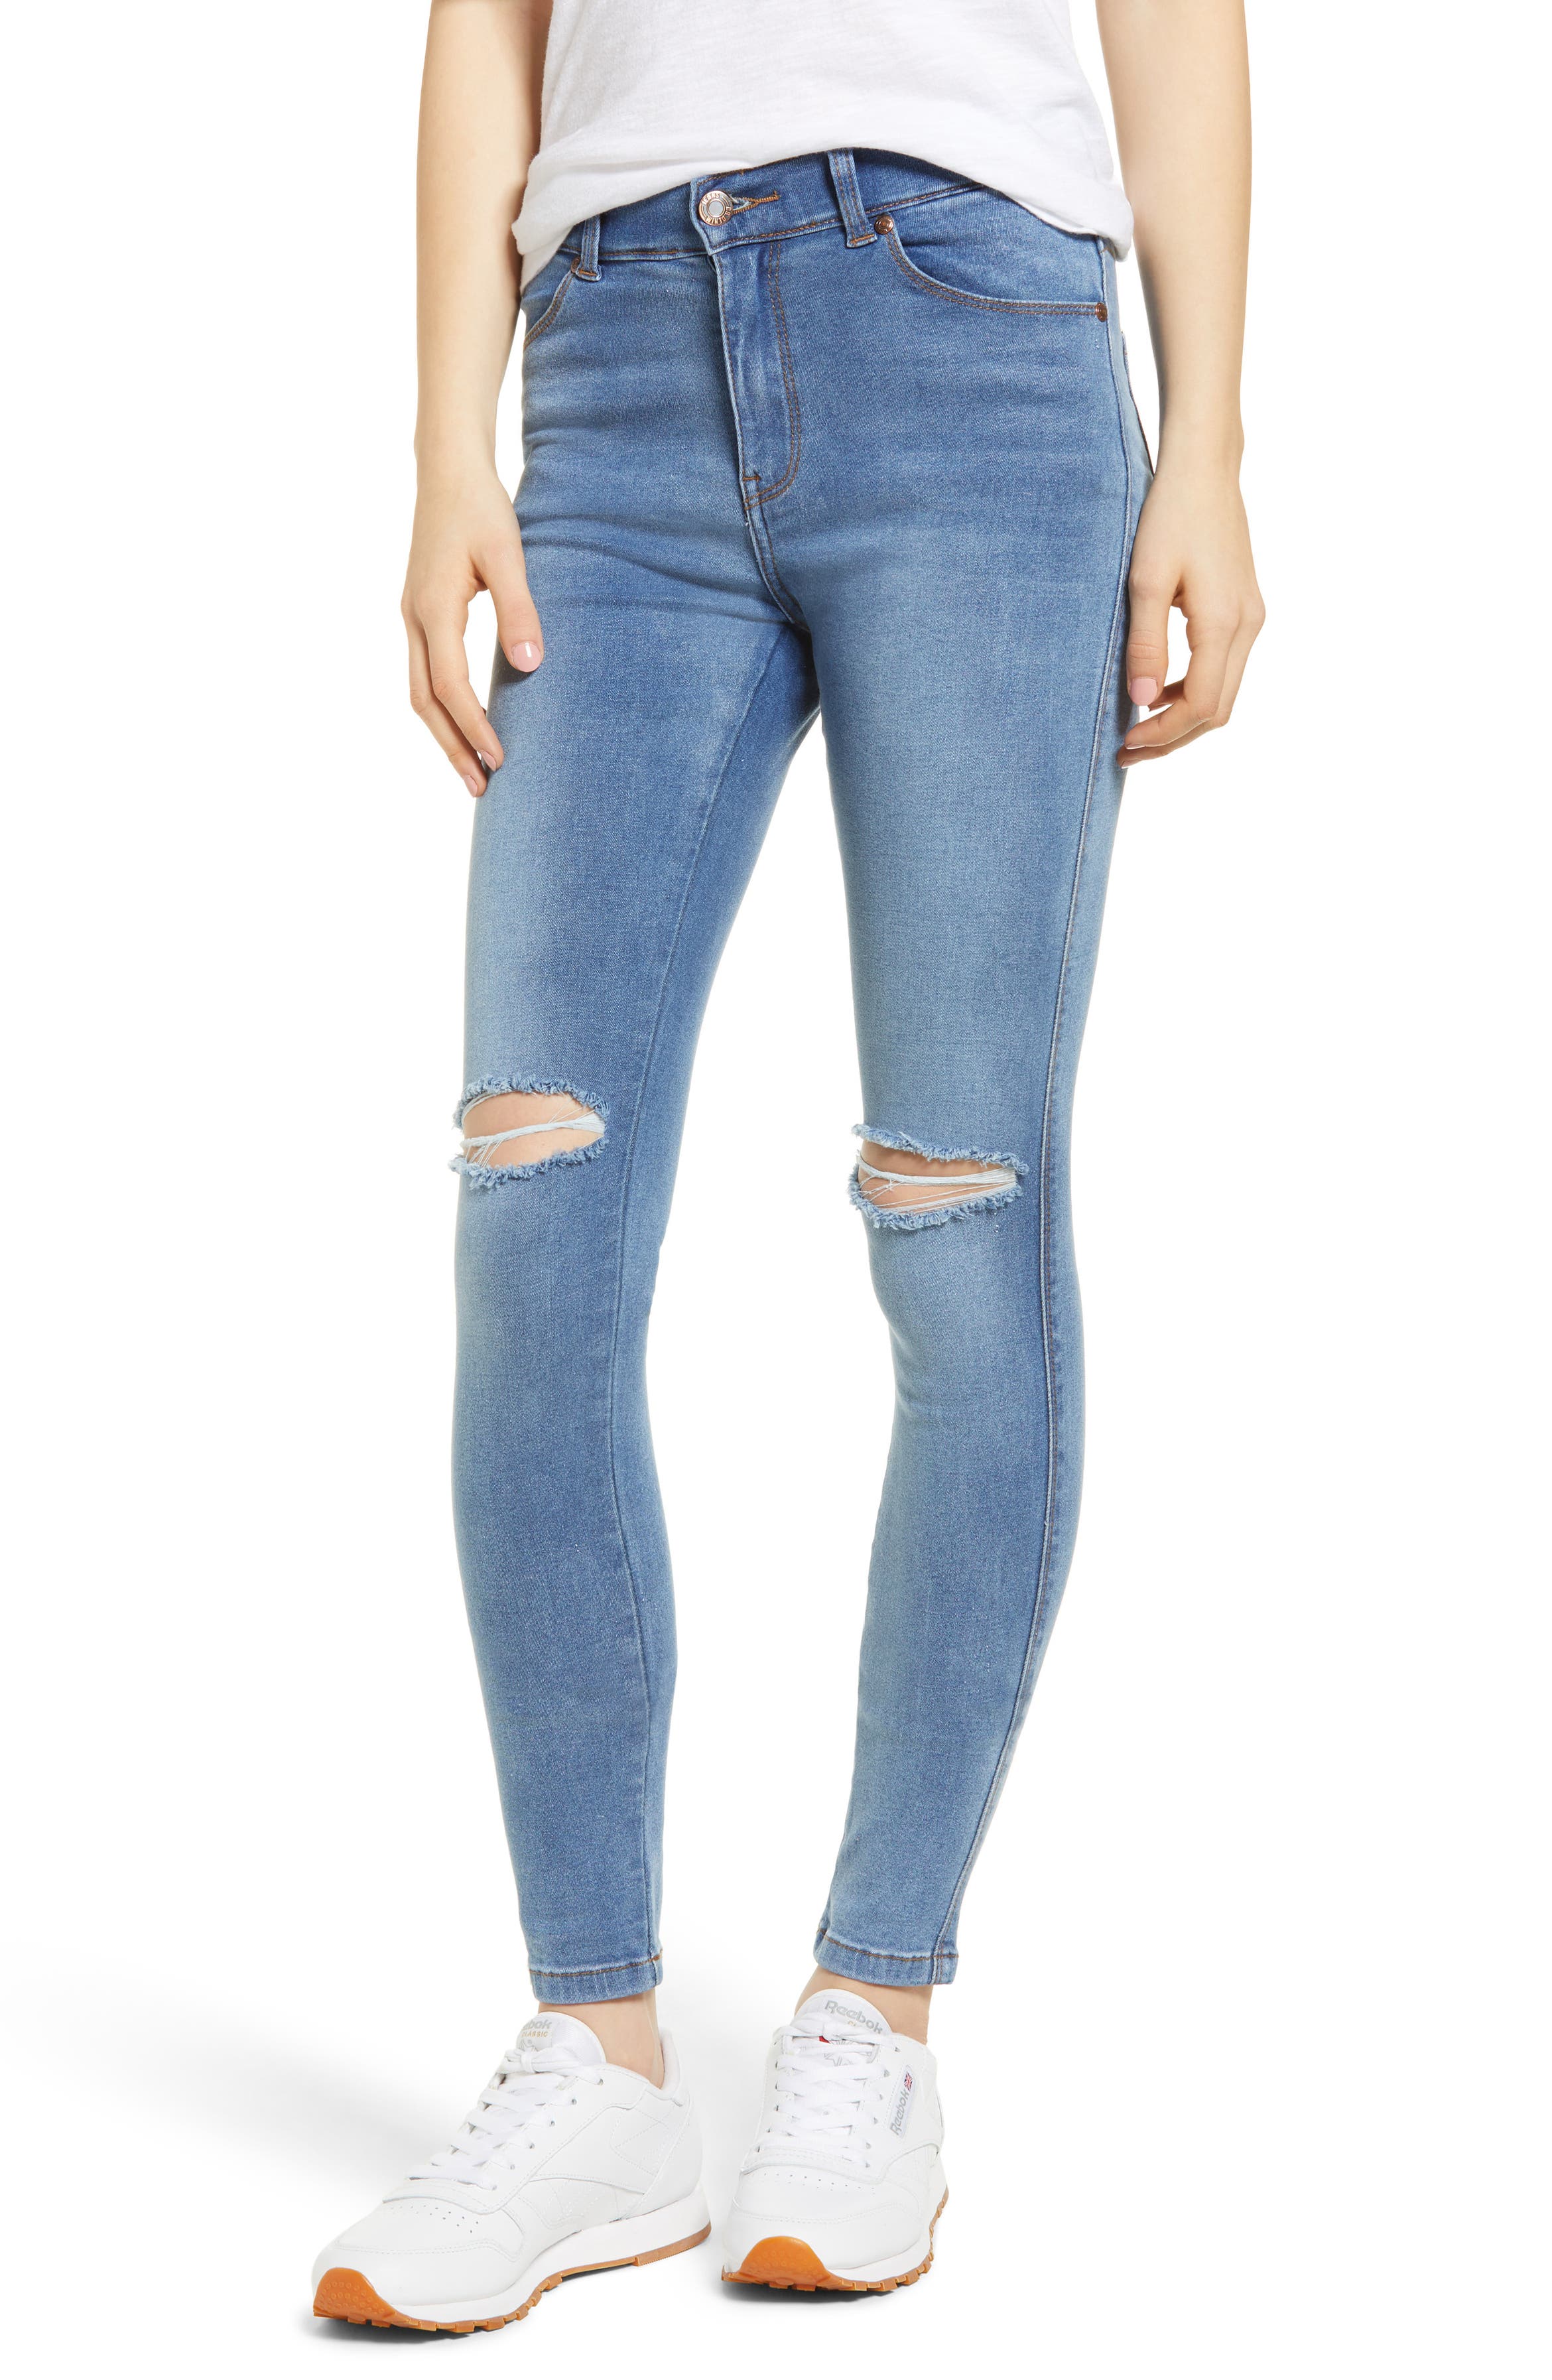 Dr. Denim Supply Co. Lexy Ripped Skinny Jeans | Nordstrom